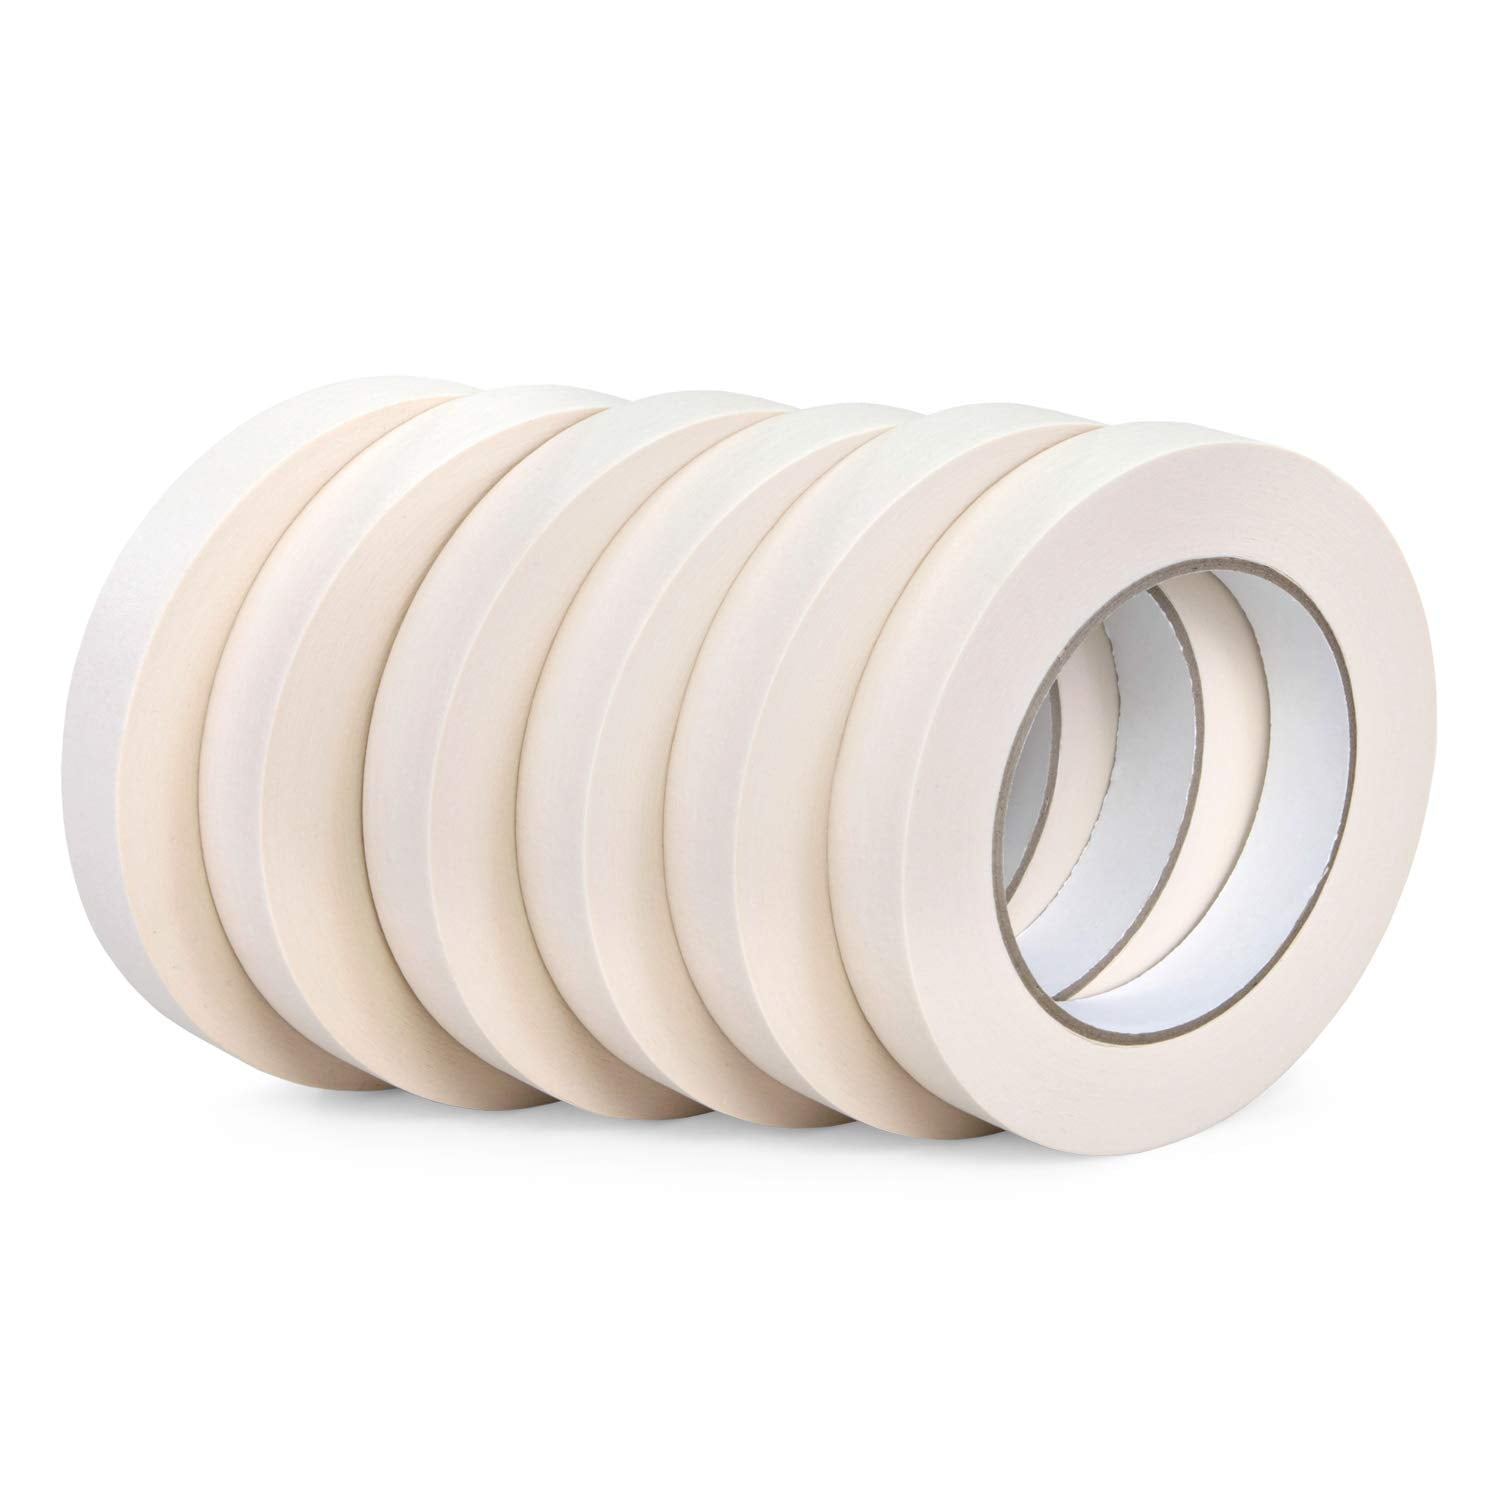 2 x 60 yards White Masking Tape for General Purpose, Natural Rubber buy in  stock in U.S. in IDL Packaging